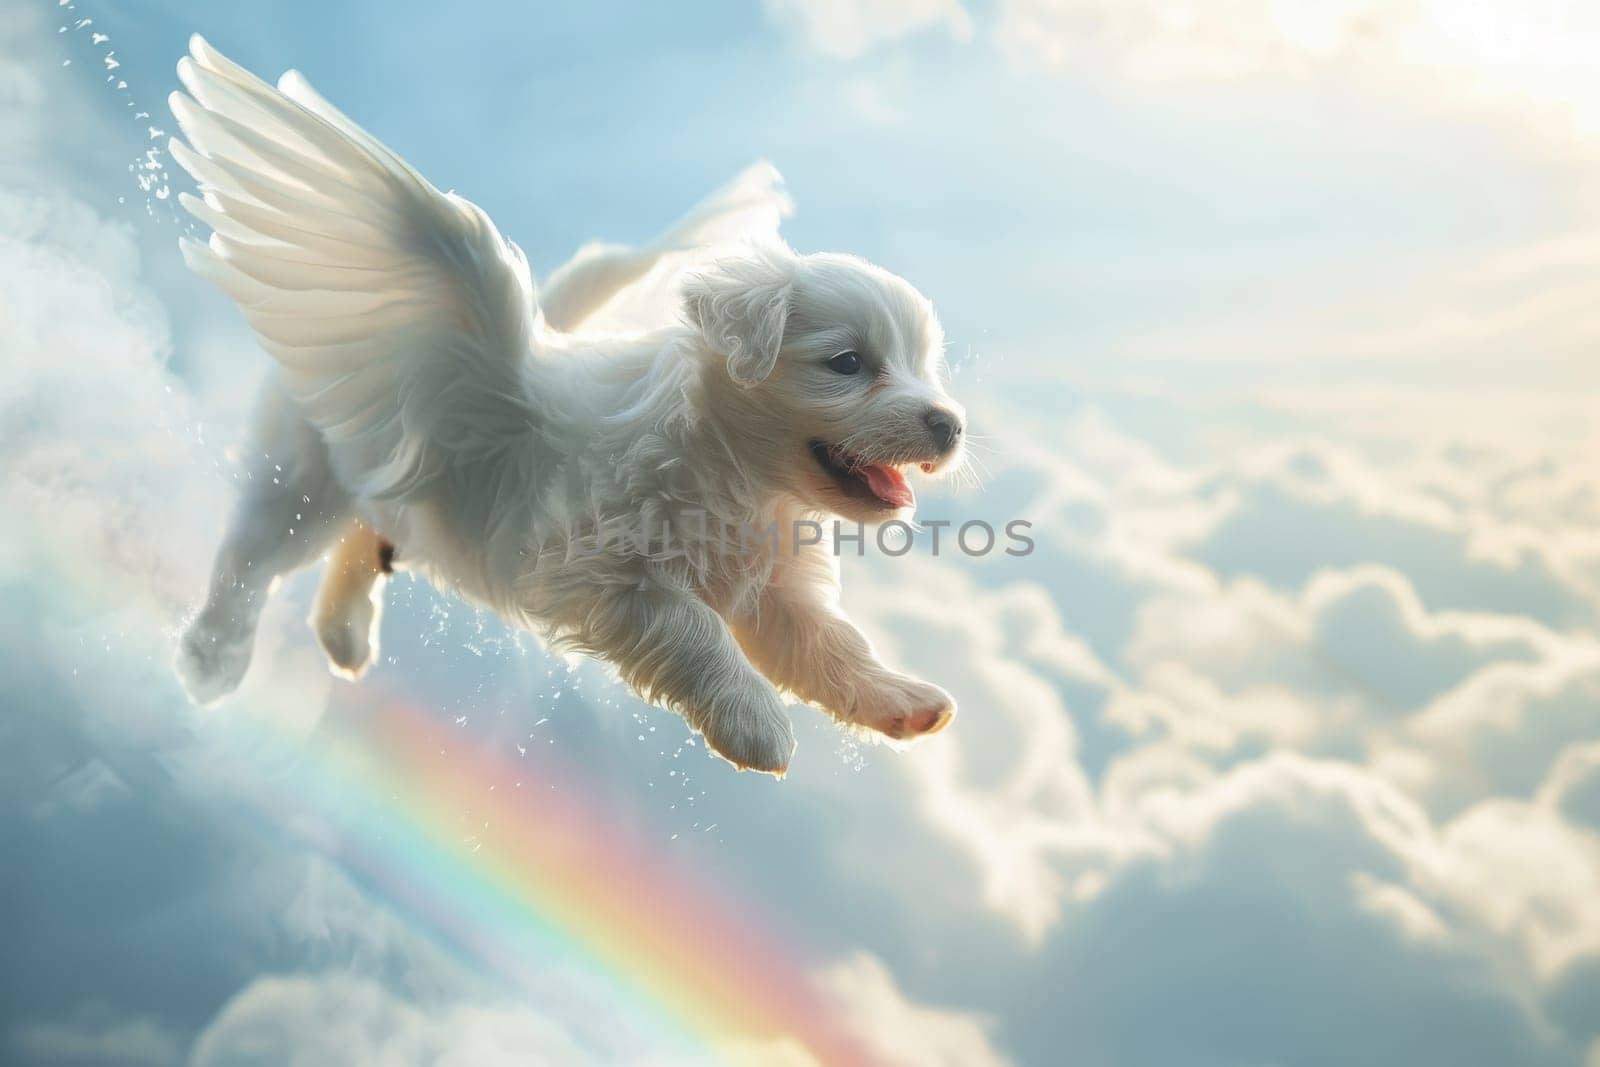 A small dog is flying through the sky with a rainbow in the background. Scene is joyful and playful, as the dog is having a great time soaring through the clouds